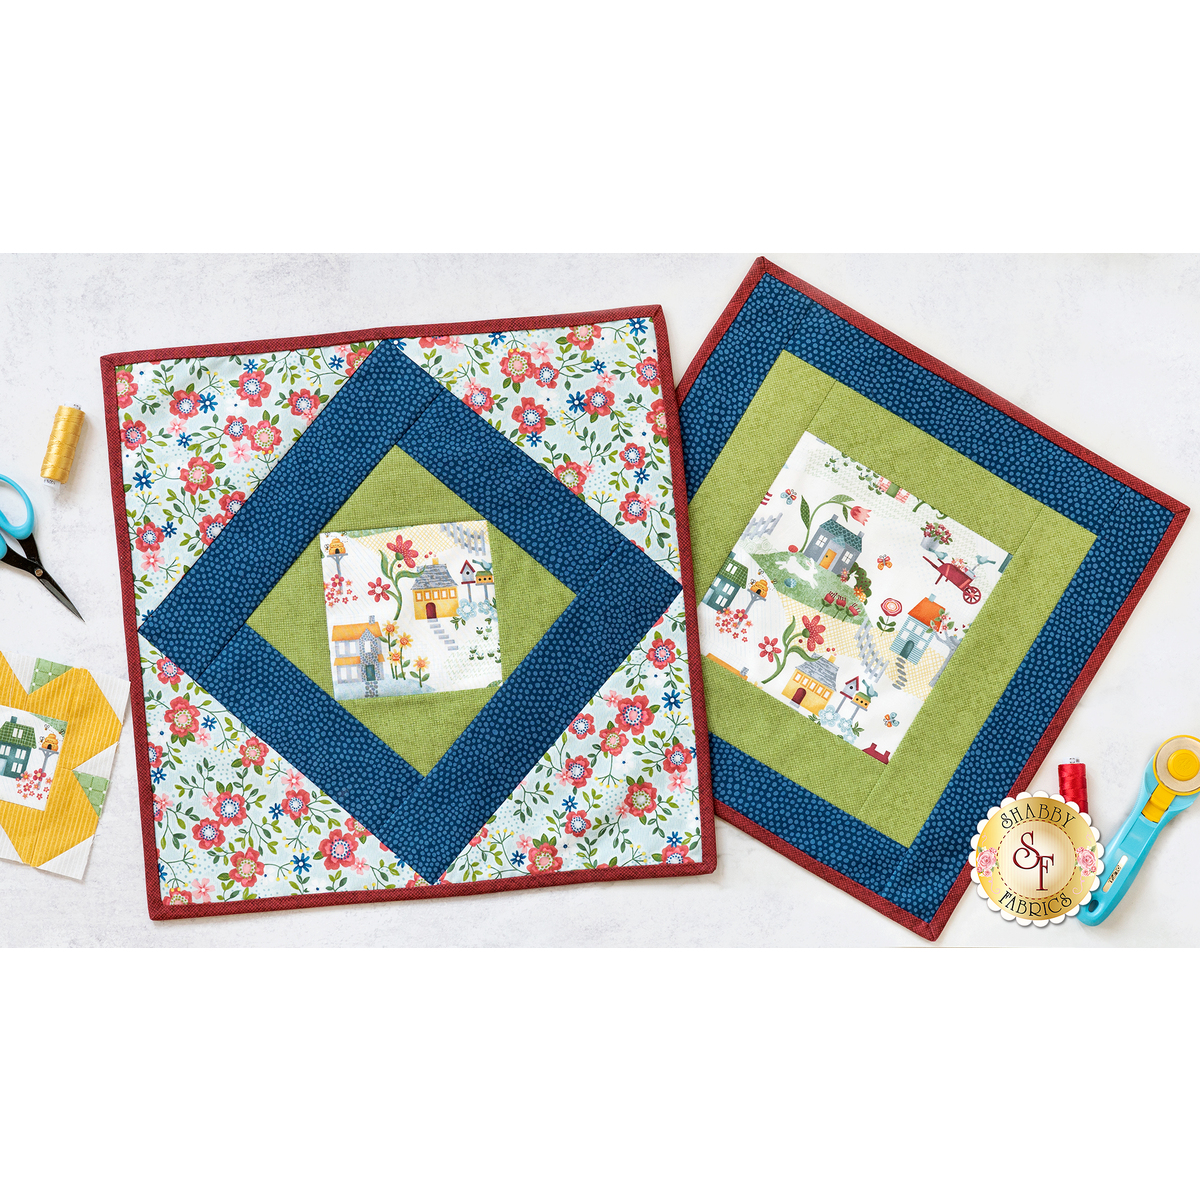 Love Quilting? You'll need these Quilt Block Bags from Yazzii! 